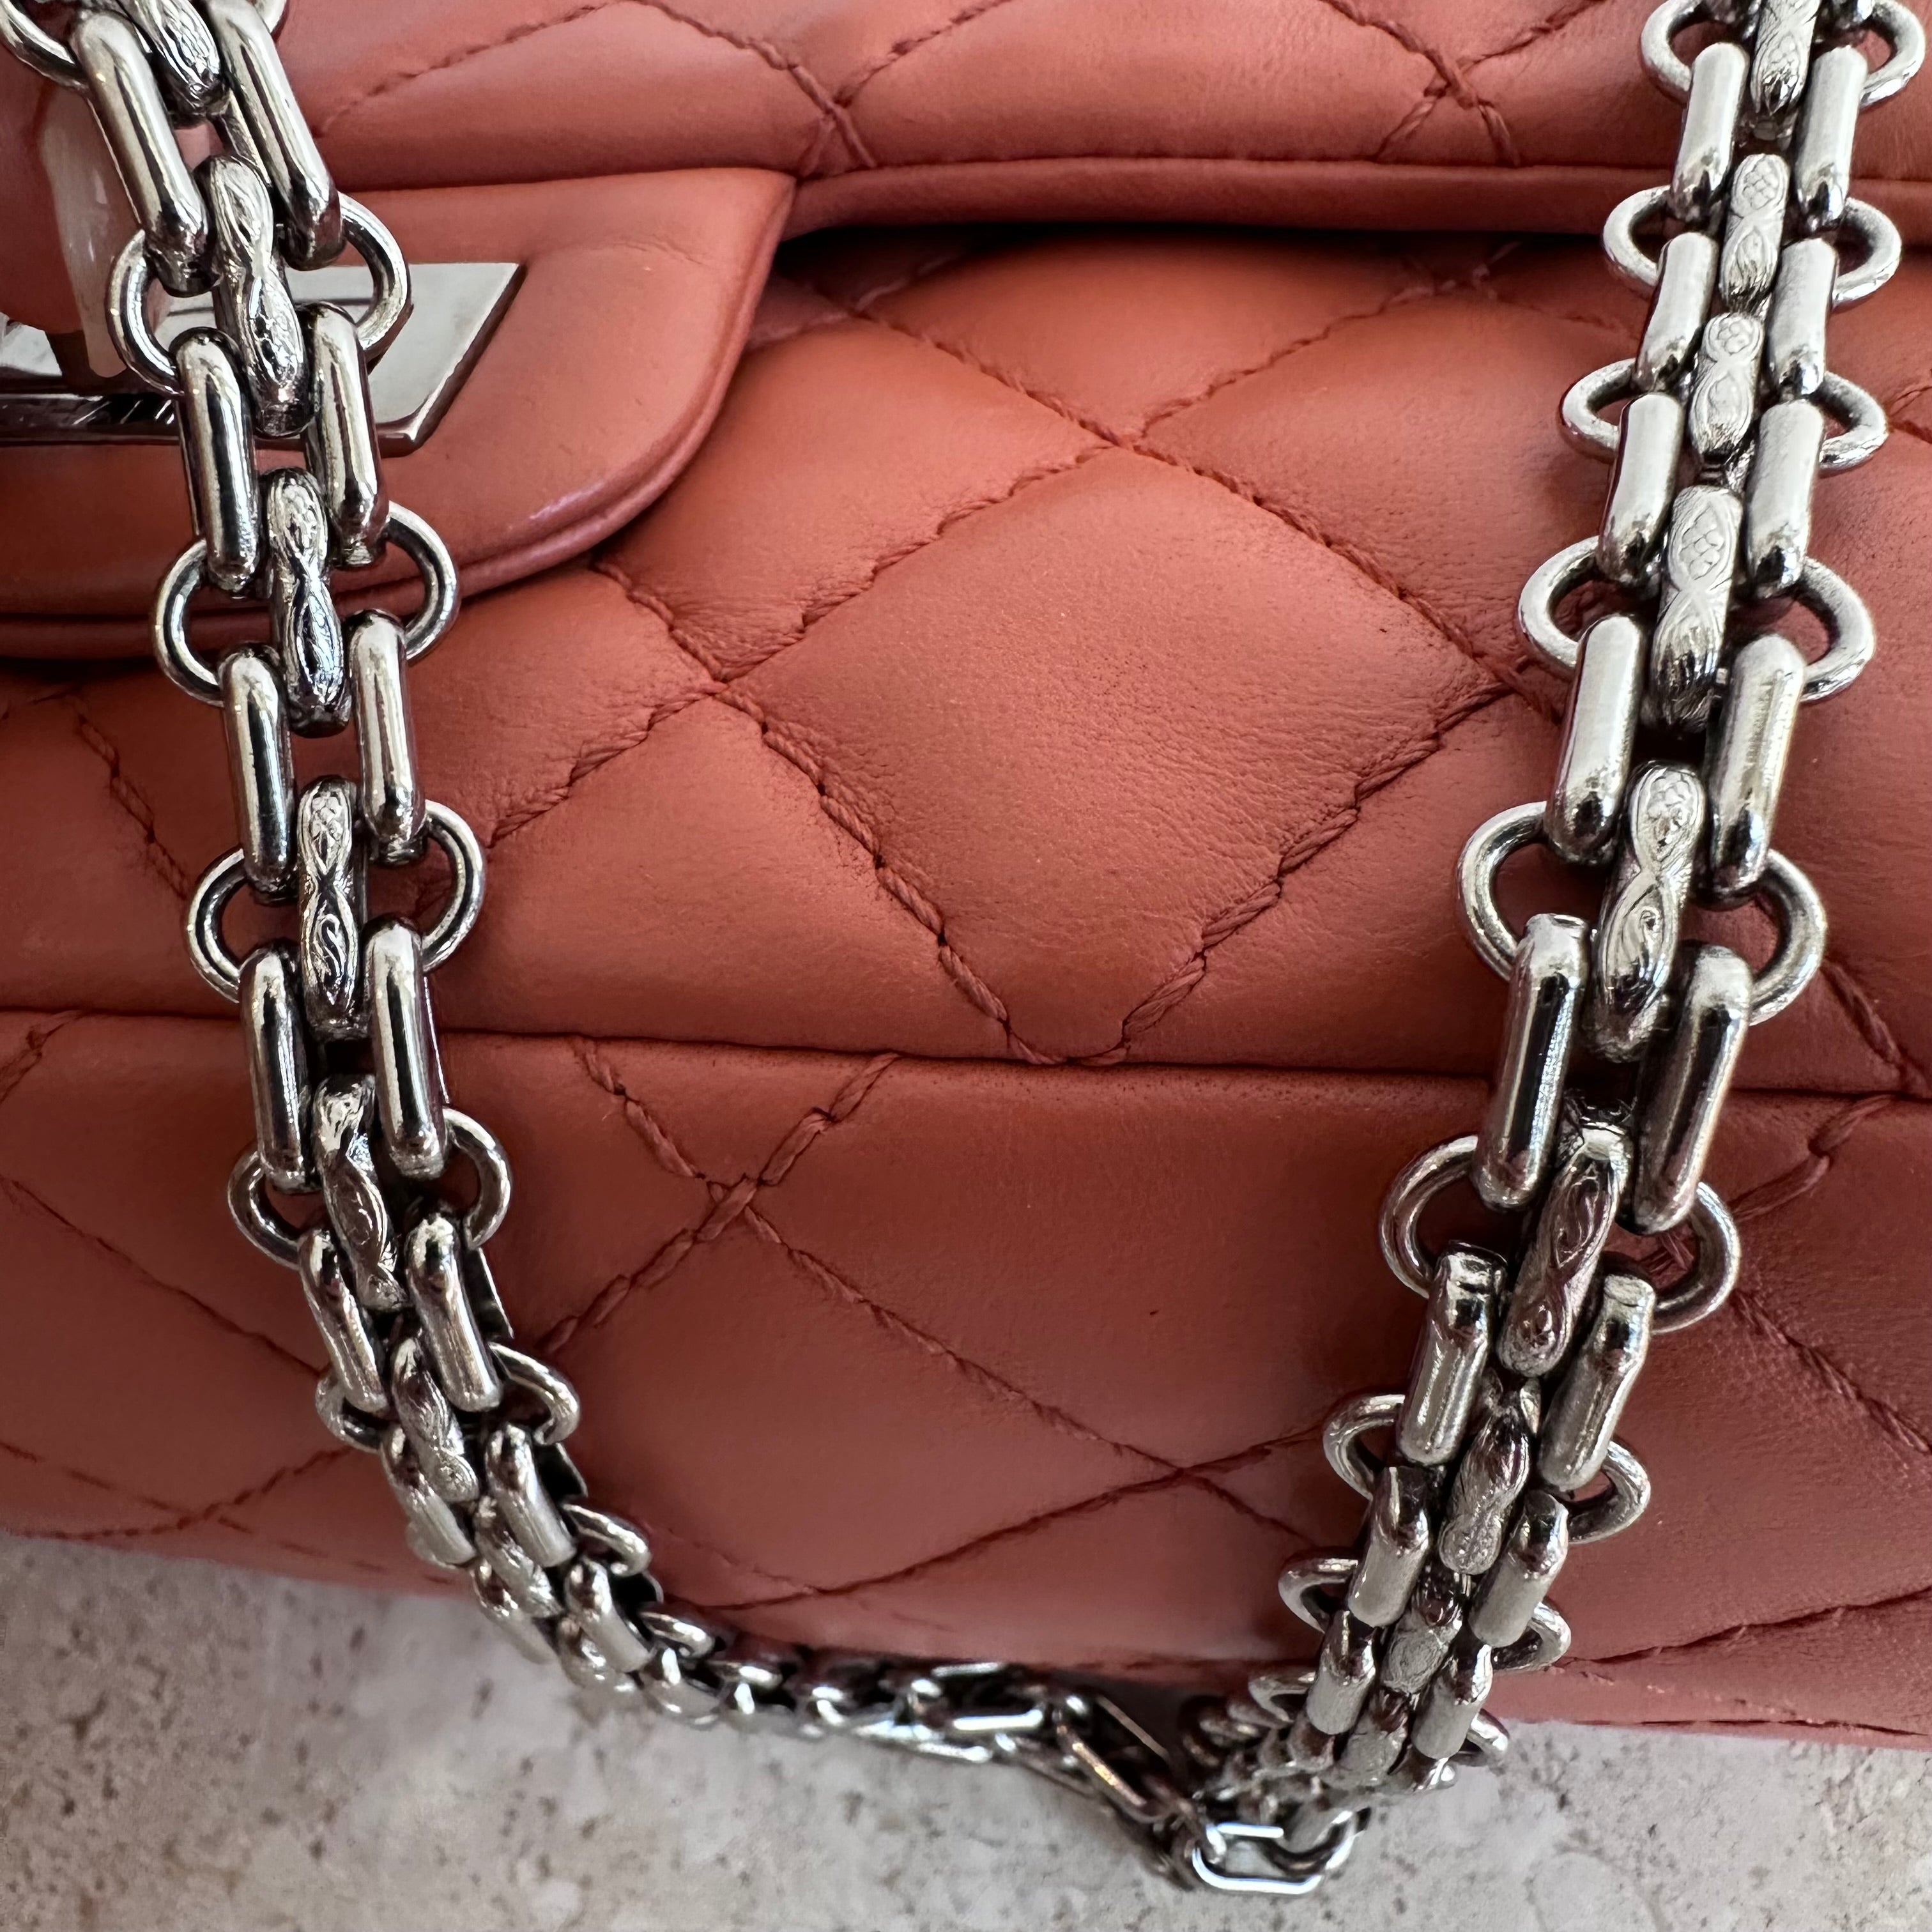 Pre-Owned CHANEL Apricot Quilted Sheepskin 2.55 Reissue Mini Flap